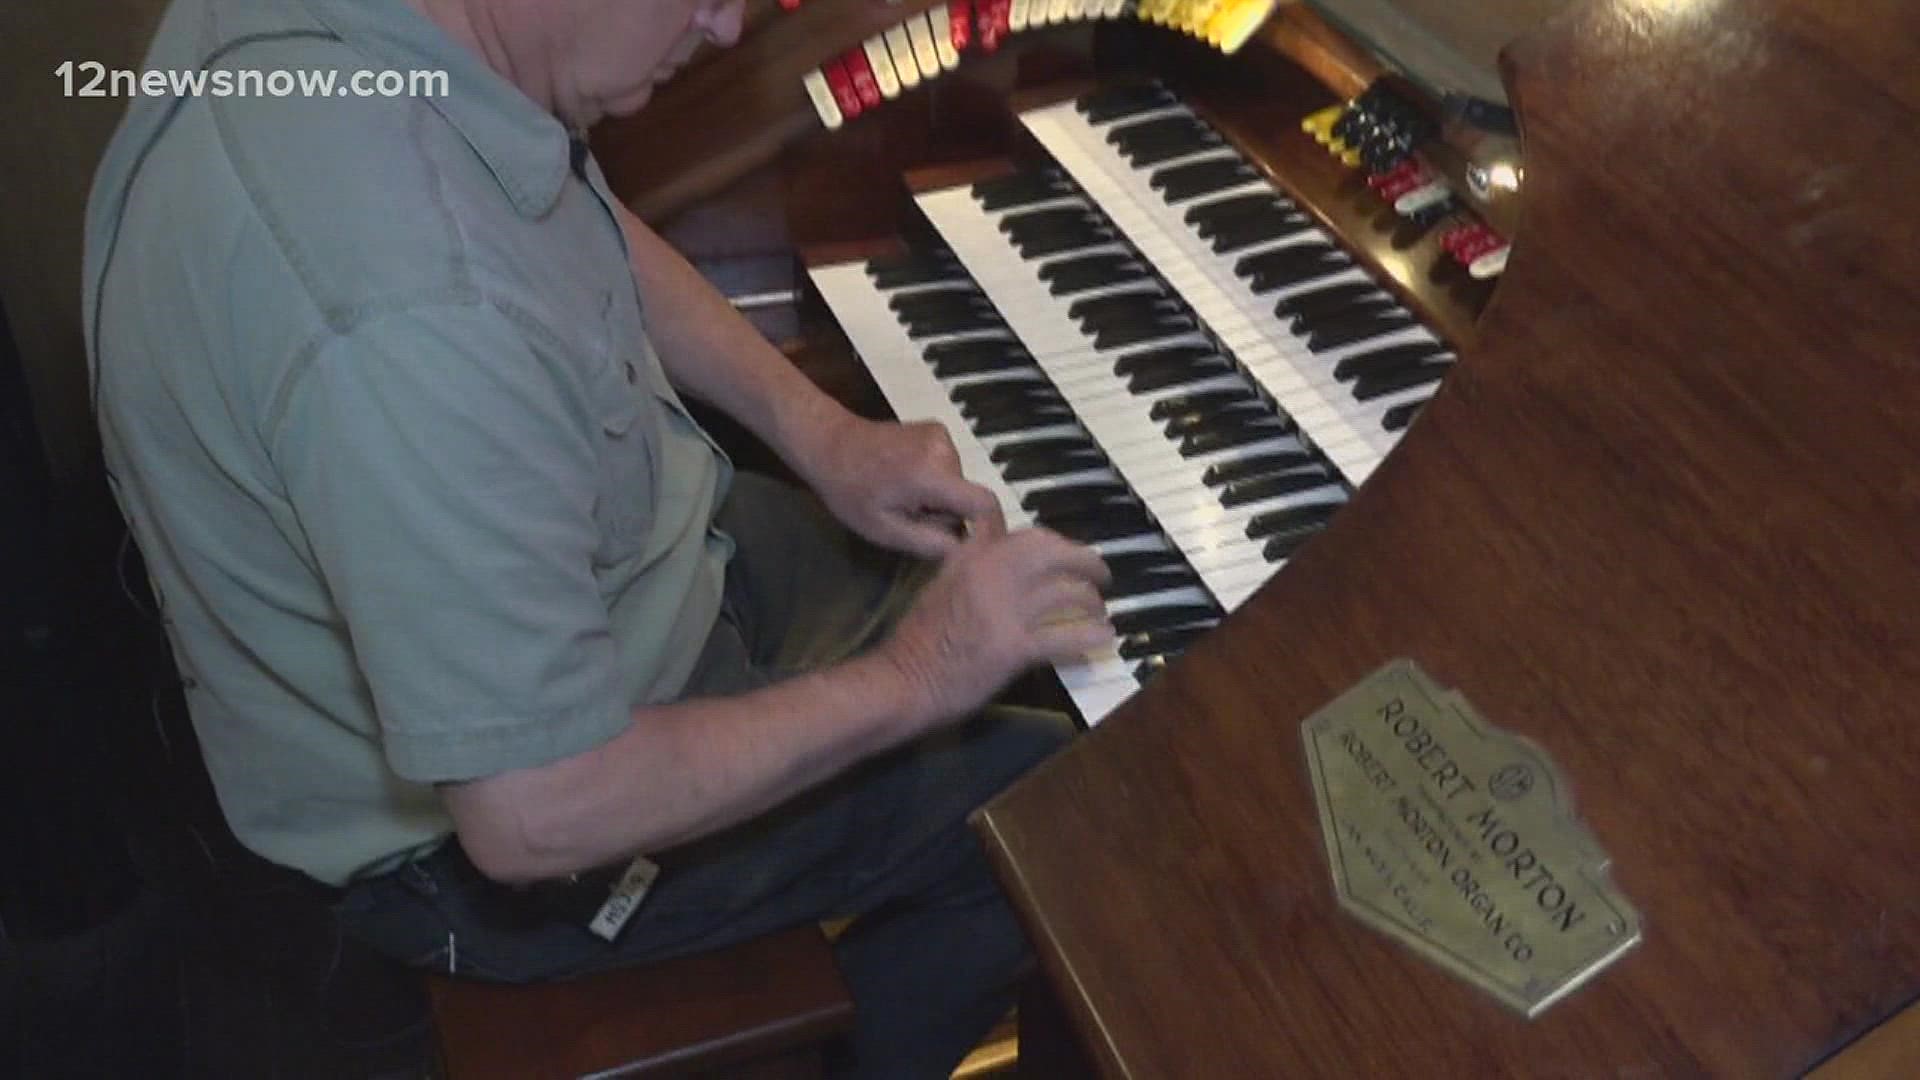 The one-of-a-kind Robert Morton Pipe Organ will play this weekend for the first time in more than 15 years.